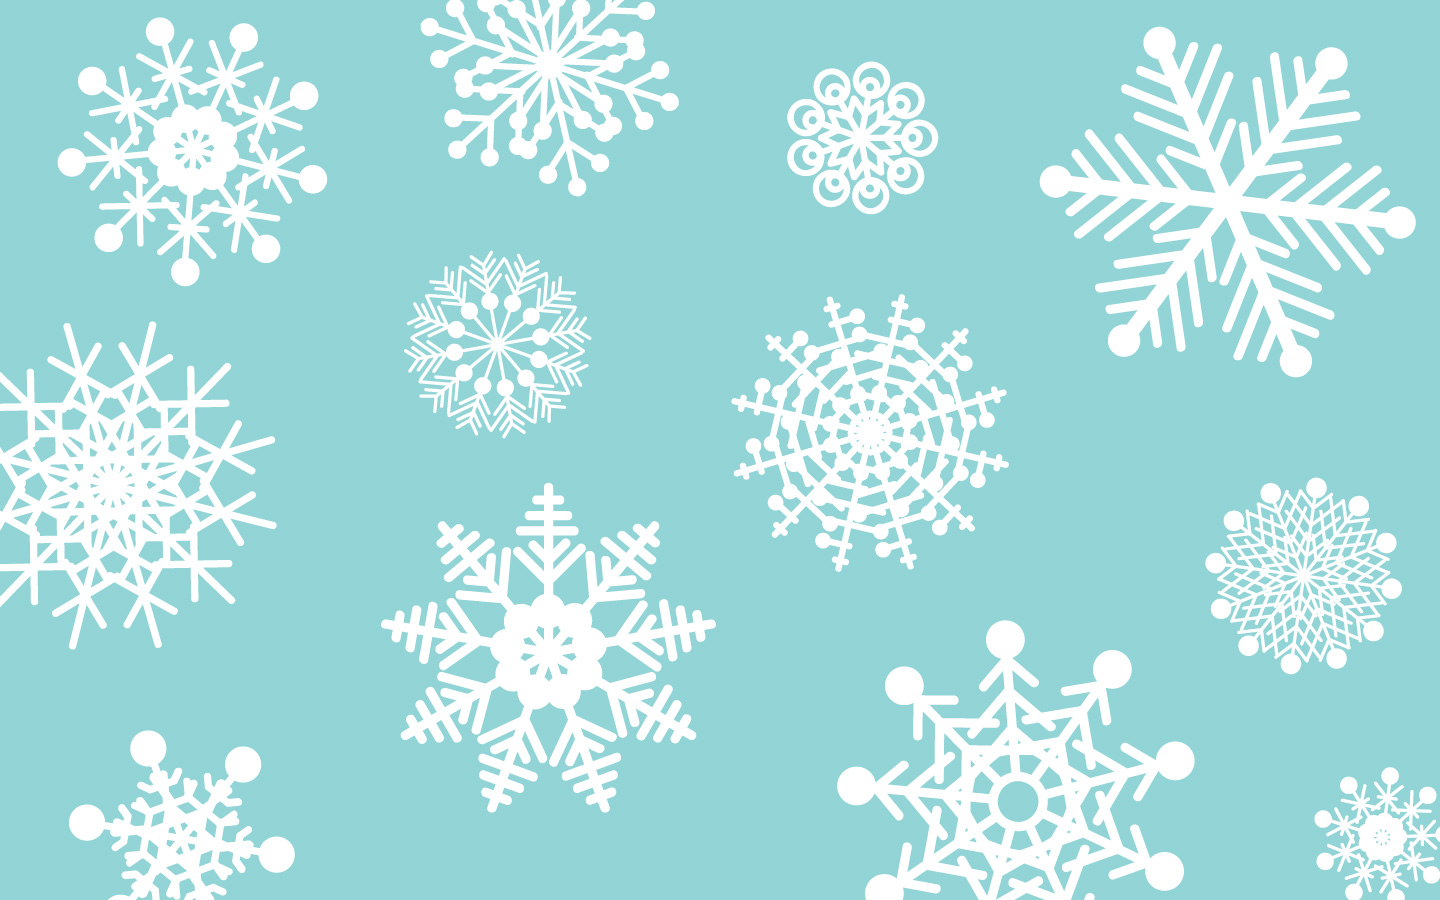 How To Make Vector Snowflakes In Adobe Illustrator Calobee Doodles